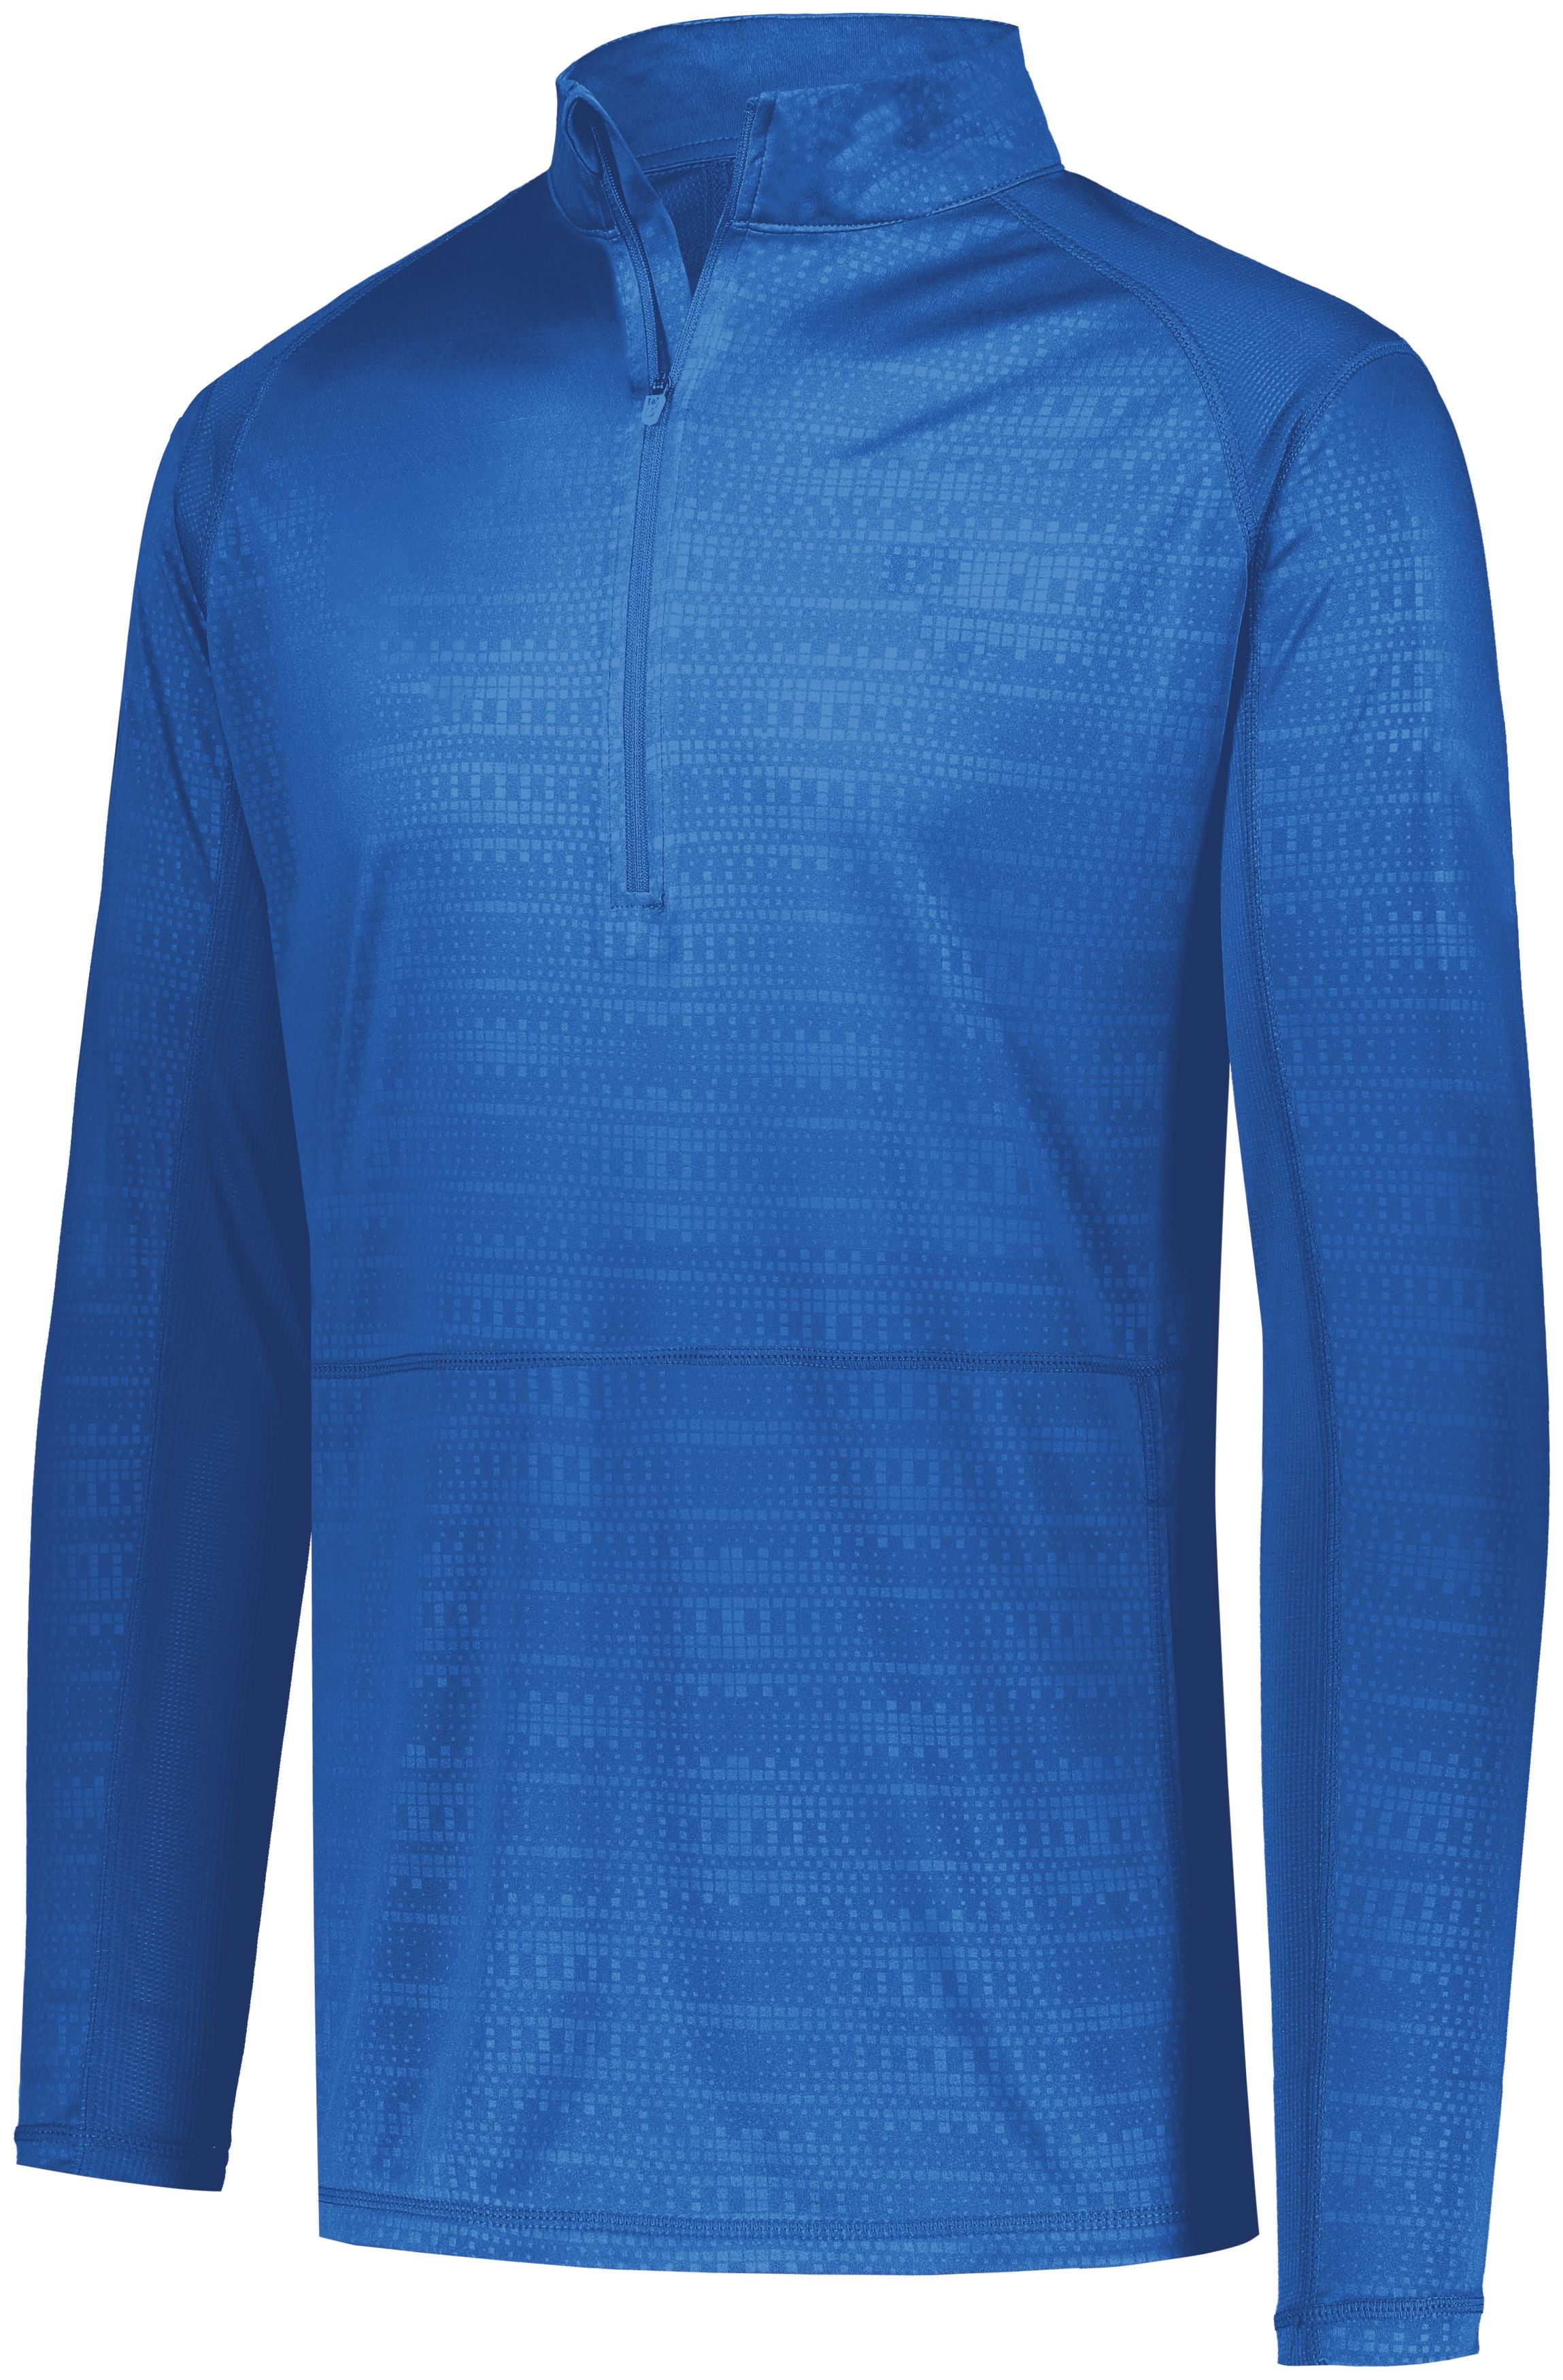 Holloway Converge 1/2 Zip Pullover in Royal  -Part of the Adult, Holloway, Shirts, Corporate-Collection, Converge-Collection product lines at KanaleyCreations.com